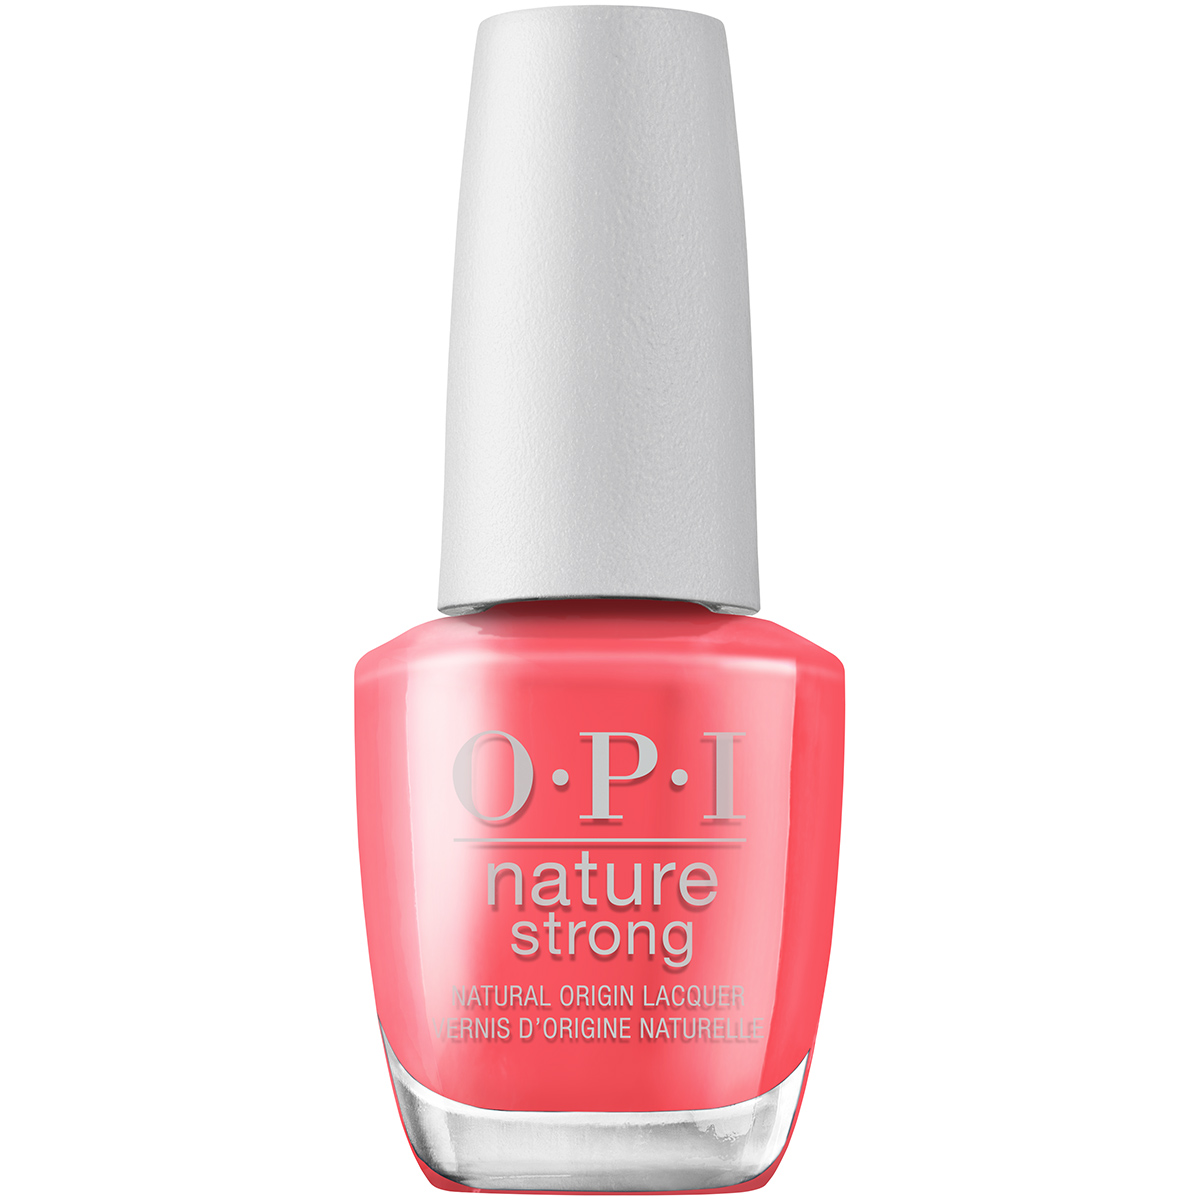 Lac de unghii Nature Strong, Once and Floral 15 ml, Opi